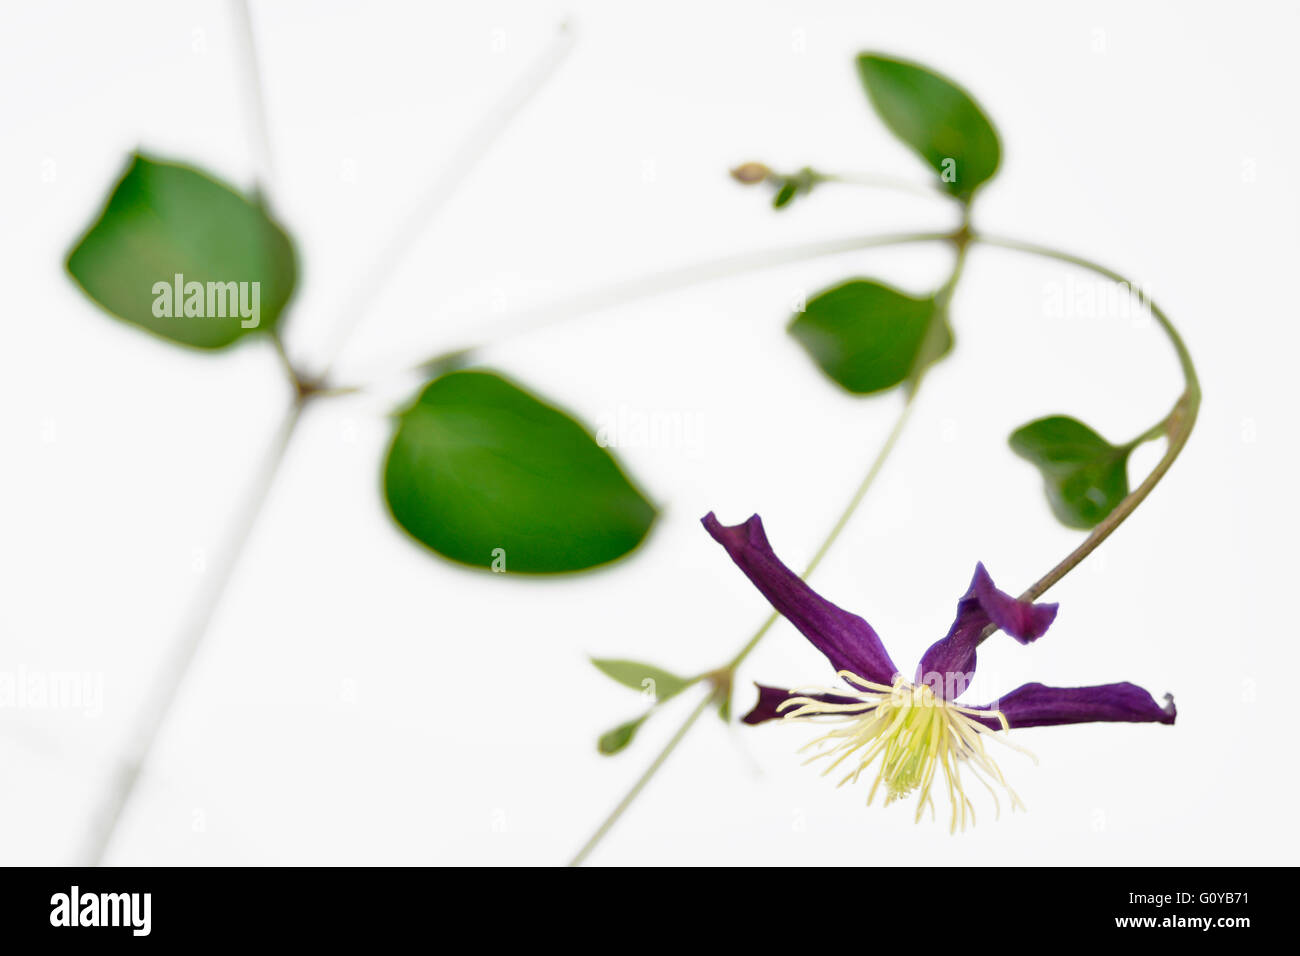 Clematis, Clematis integrifolia, Beauty in Nature, Climber, Colour, Contemporary, Cottage garden plant, Creative, Cut Out, Deciduous, Europe indigenous, Flower, Summer Flowering, Frost hardy, Perennial, Plant, Stamen, Studio Shot, Wild flower, Purple, White, Stock Photo